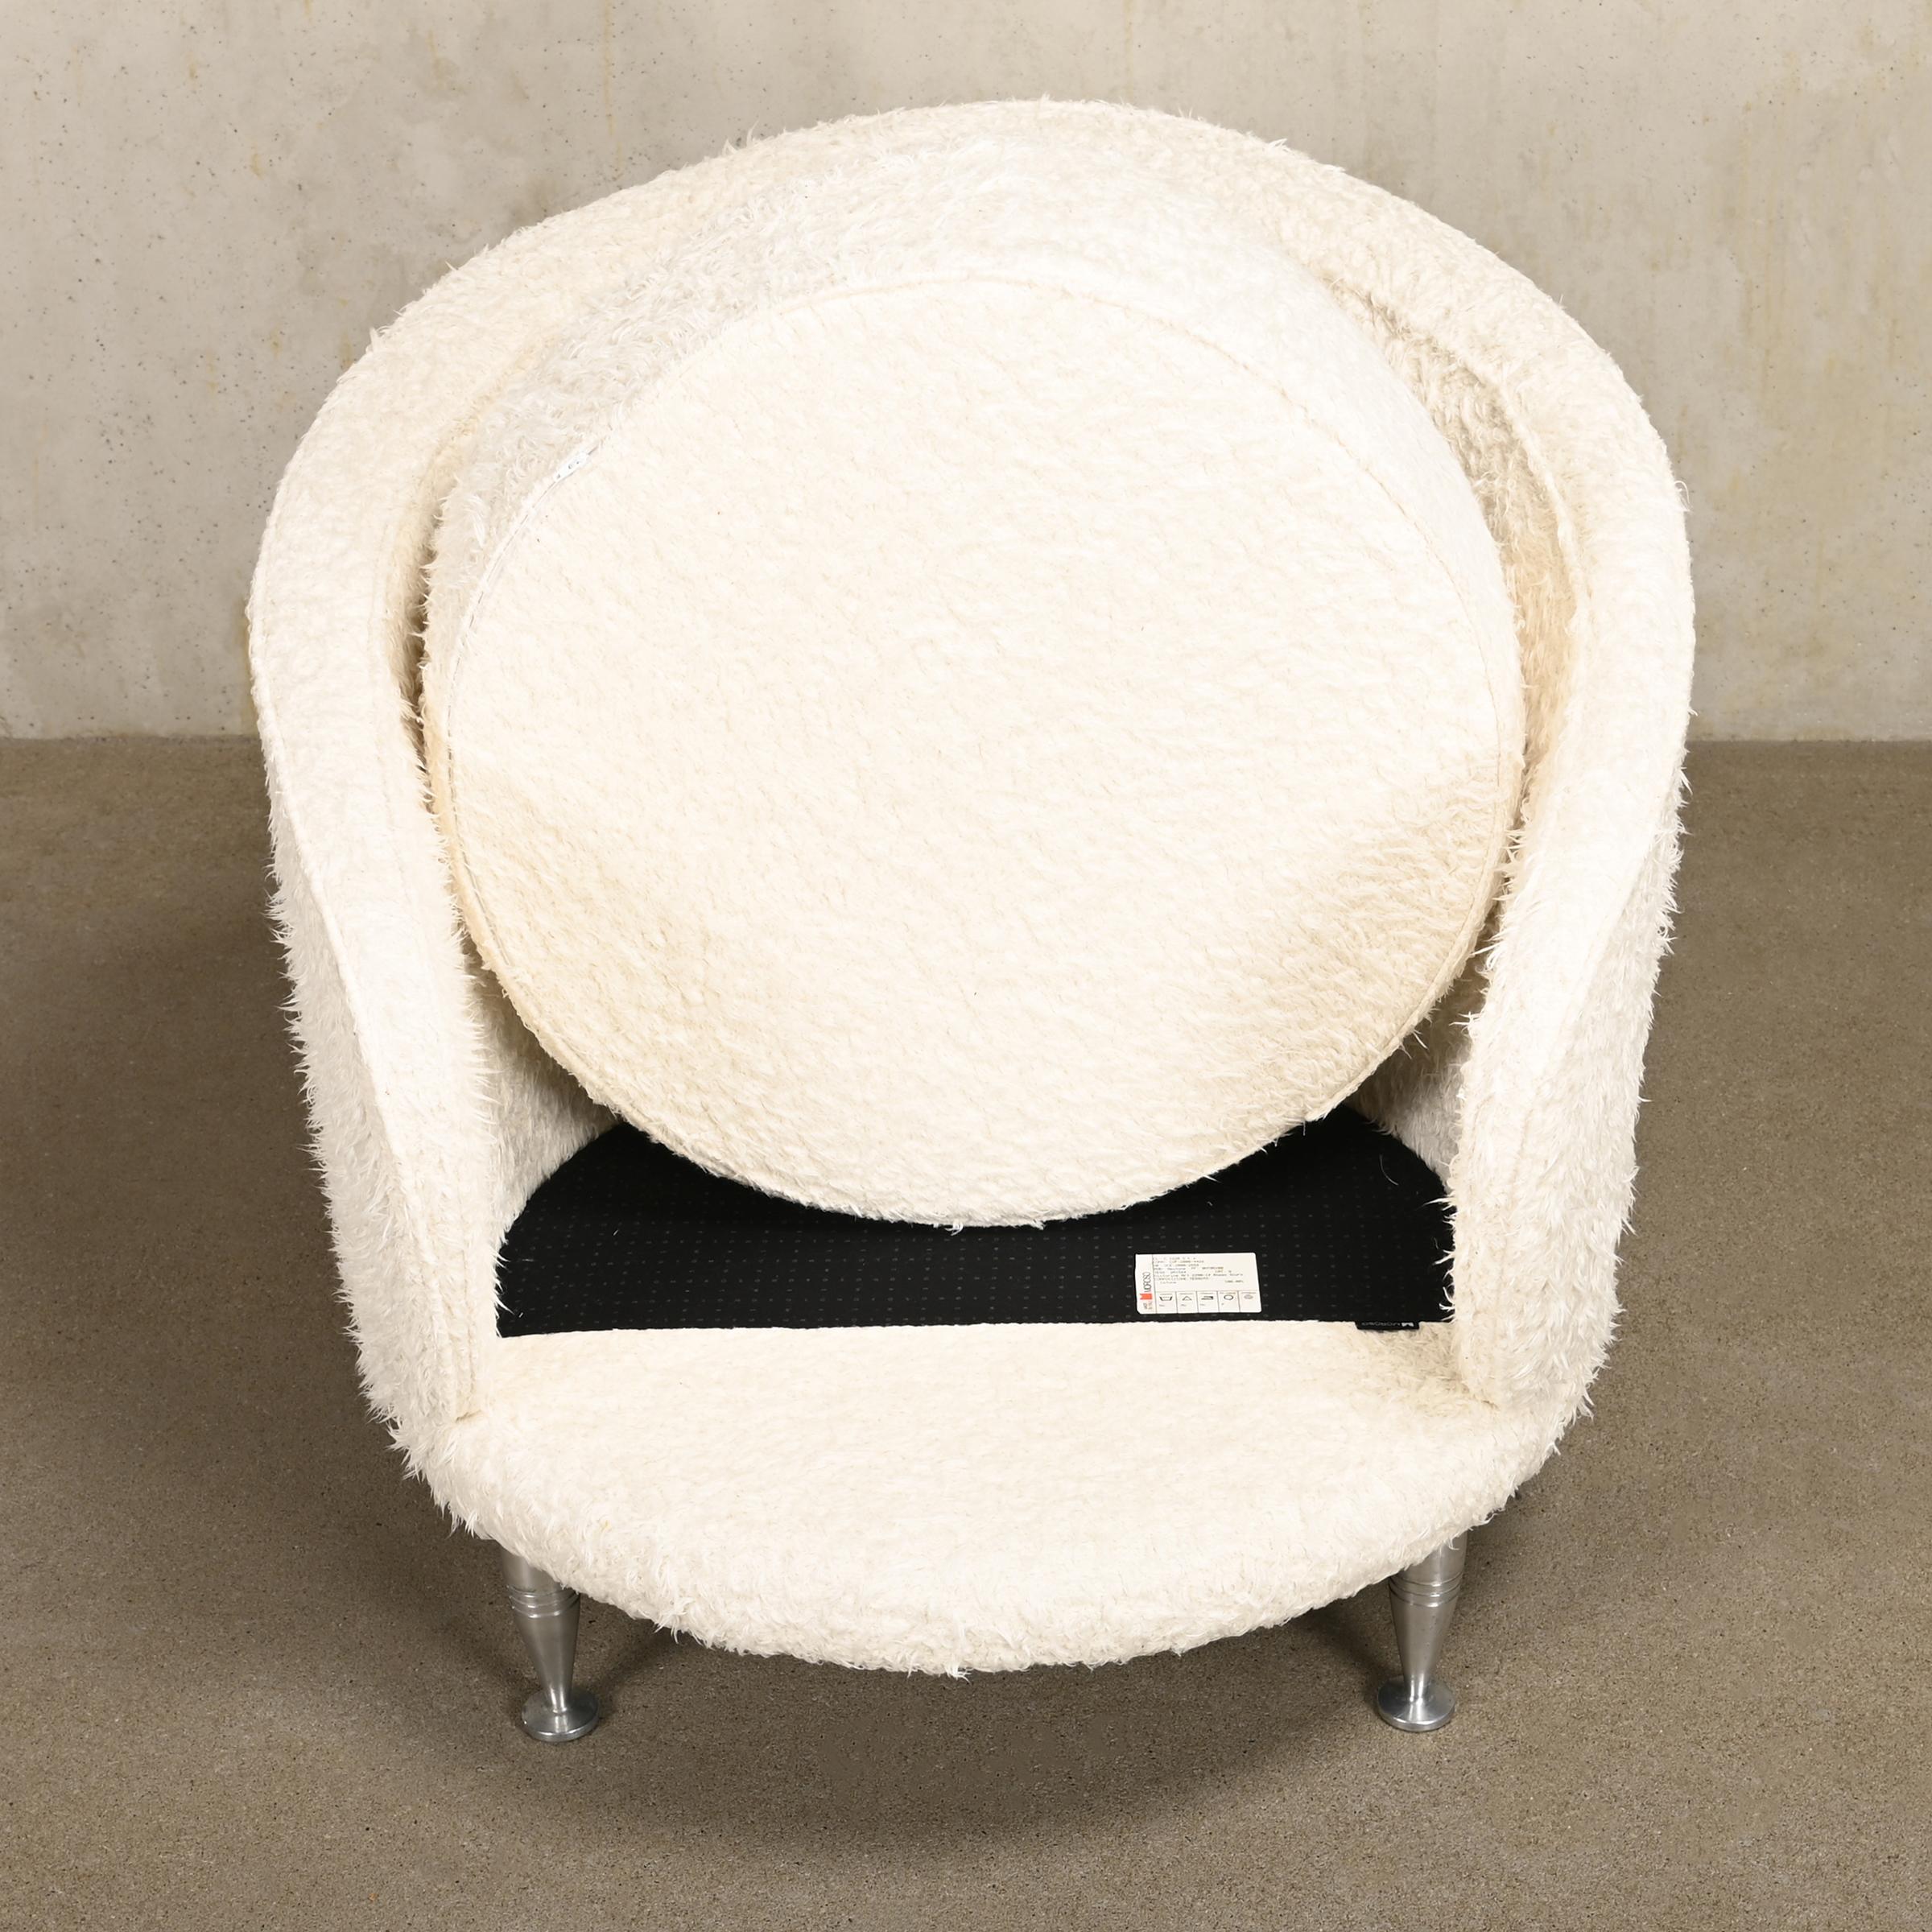 Massimo Iosa Ghini Armchair New Tone in white long pile cotton for Moroso, Italy For Sale 7